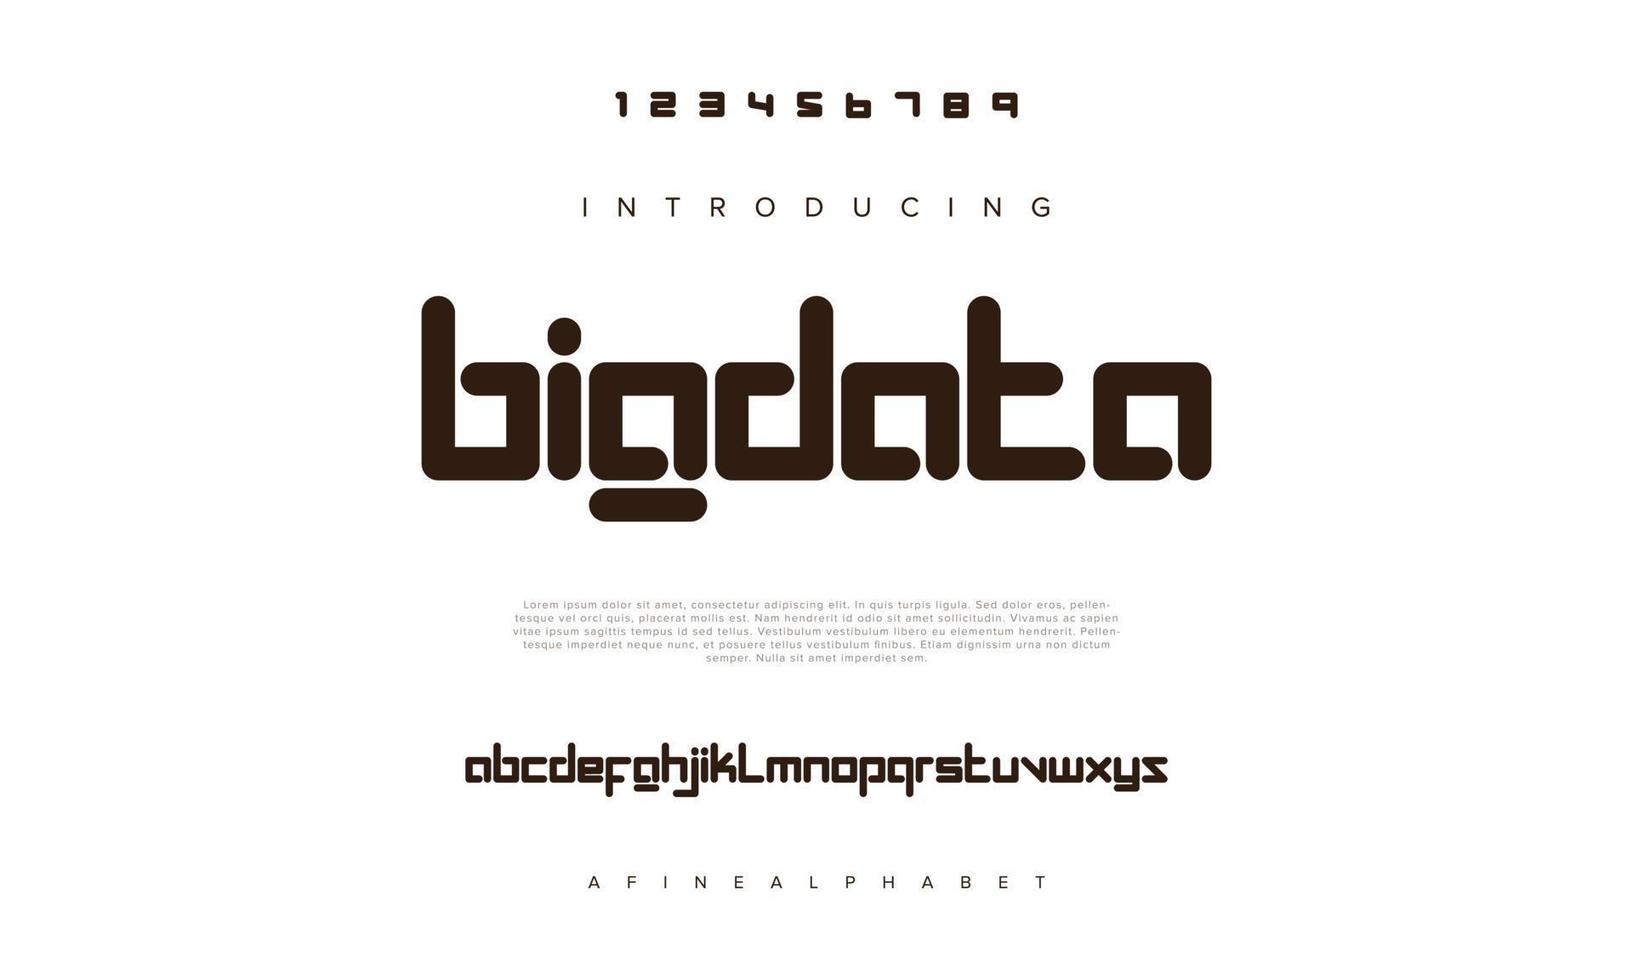 Bigdata abstract fashion font alphabet. Minimal modern urban fonts for logo, brand etc. Typography typeface uppercase lowercase and number. vector illustration